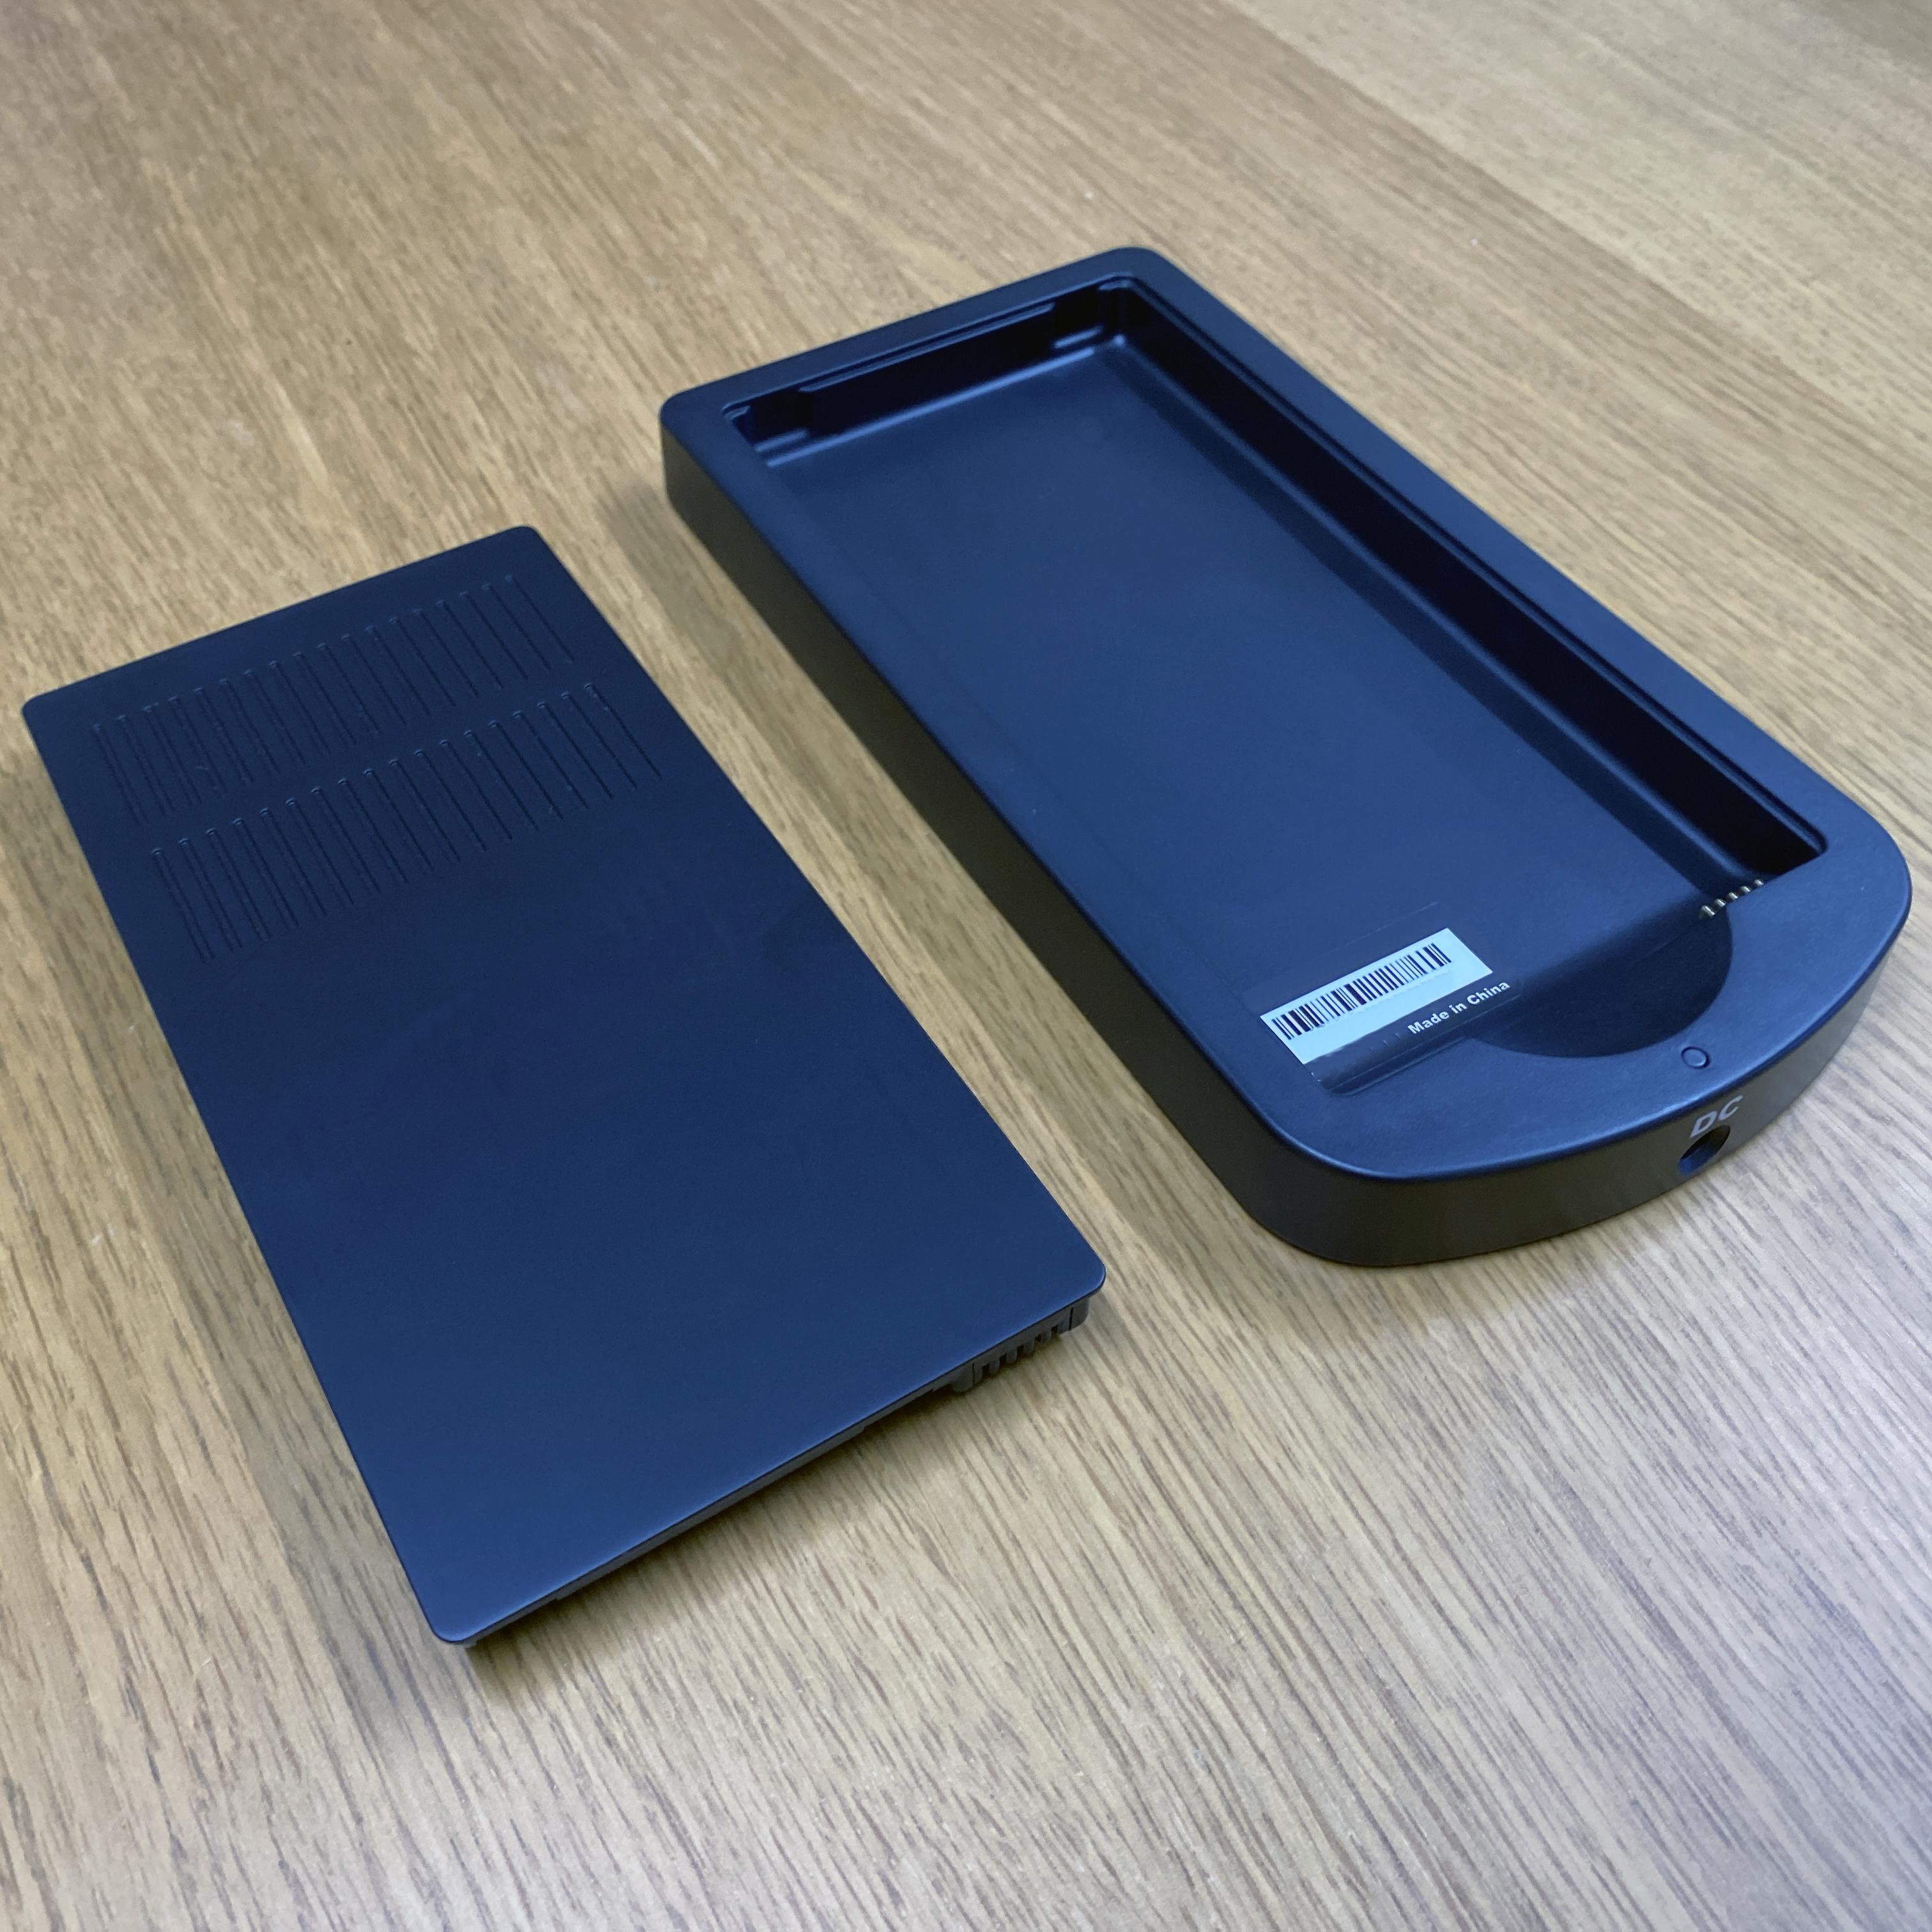 Cloverbook additional battery and charging dock